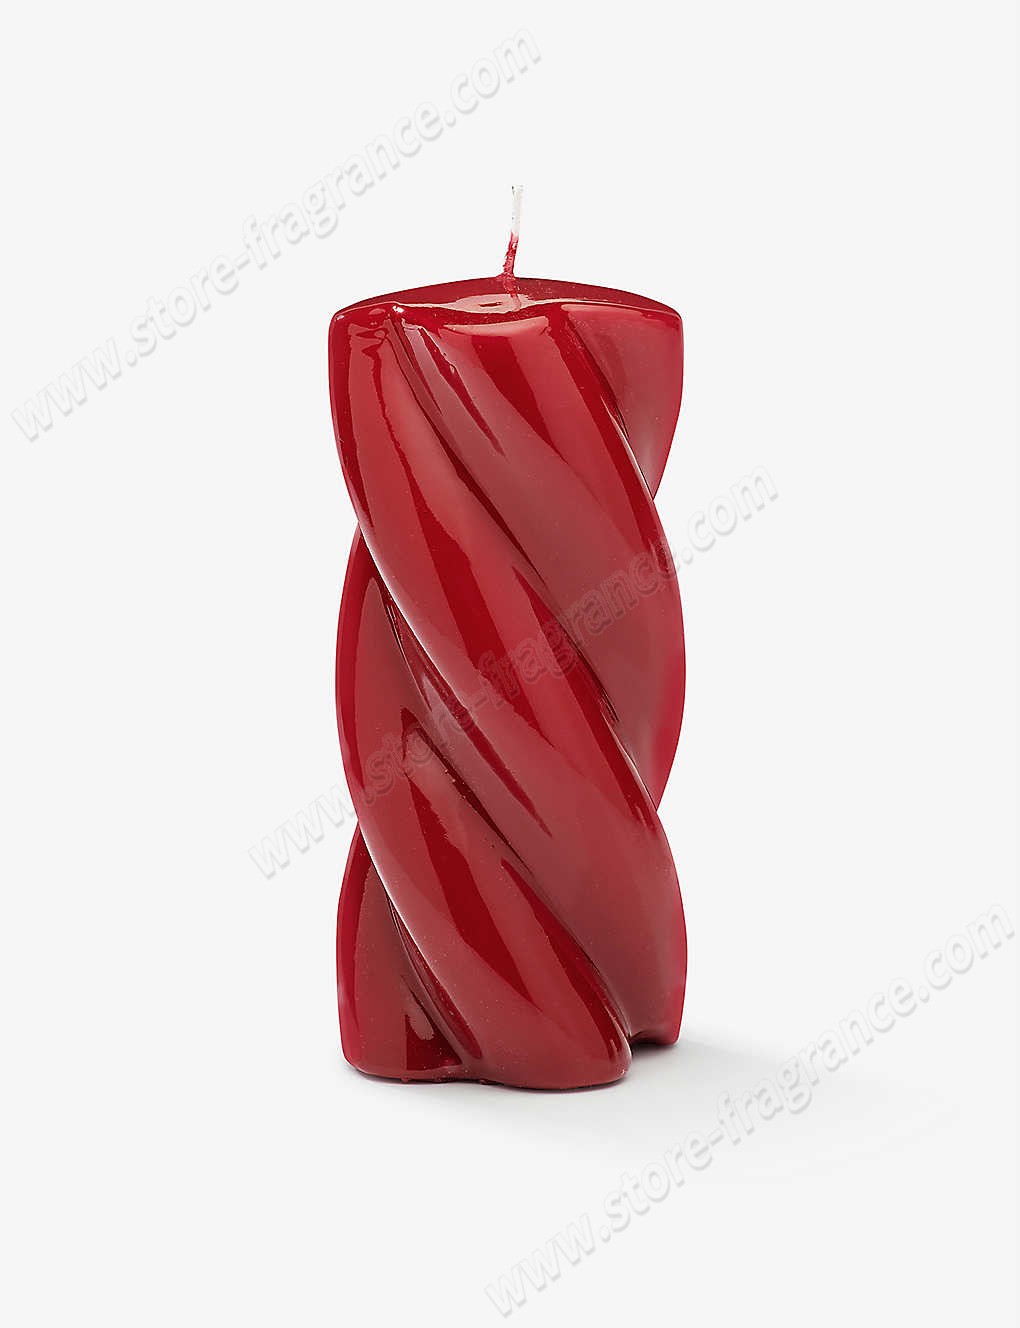 ANNA + NINA/Blunt Twisted paraffin candle 14cm Limit Offer - ANNA + NINA/Blunt Twisted paraffin candle 14cm Limit Offer